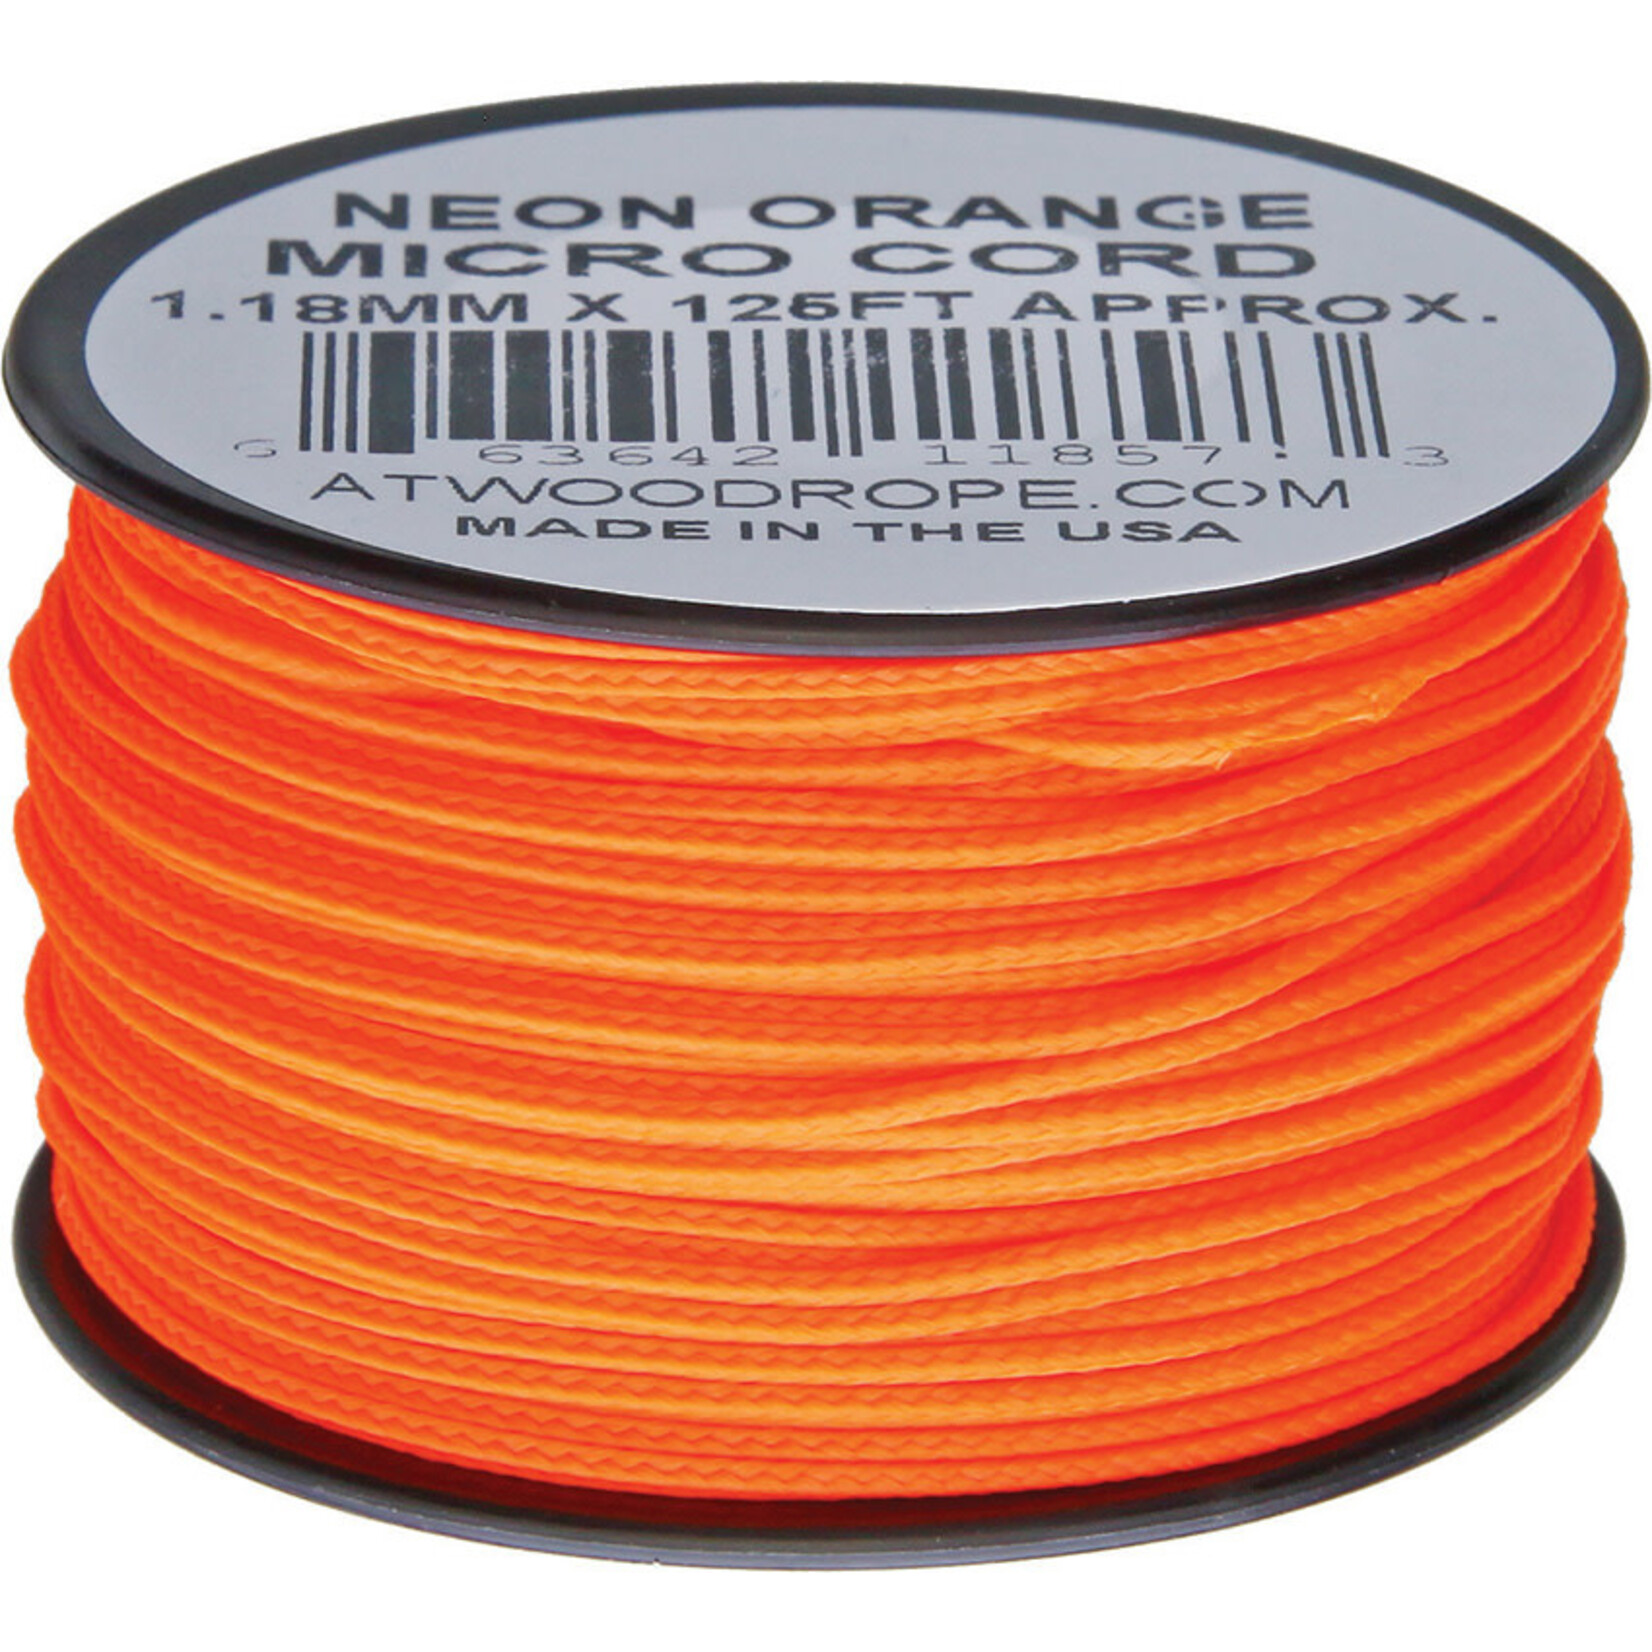 Atwood Rope Atwood Micro Cord 1.18mm 125ft Spool